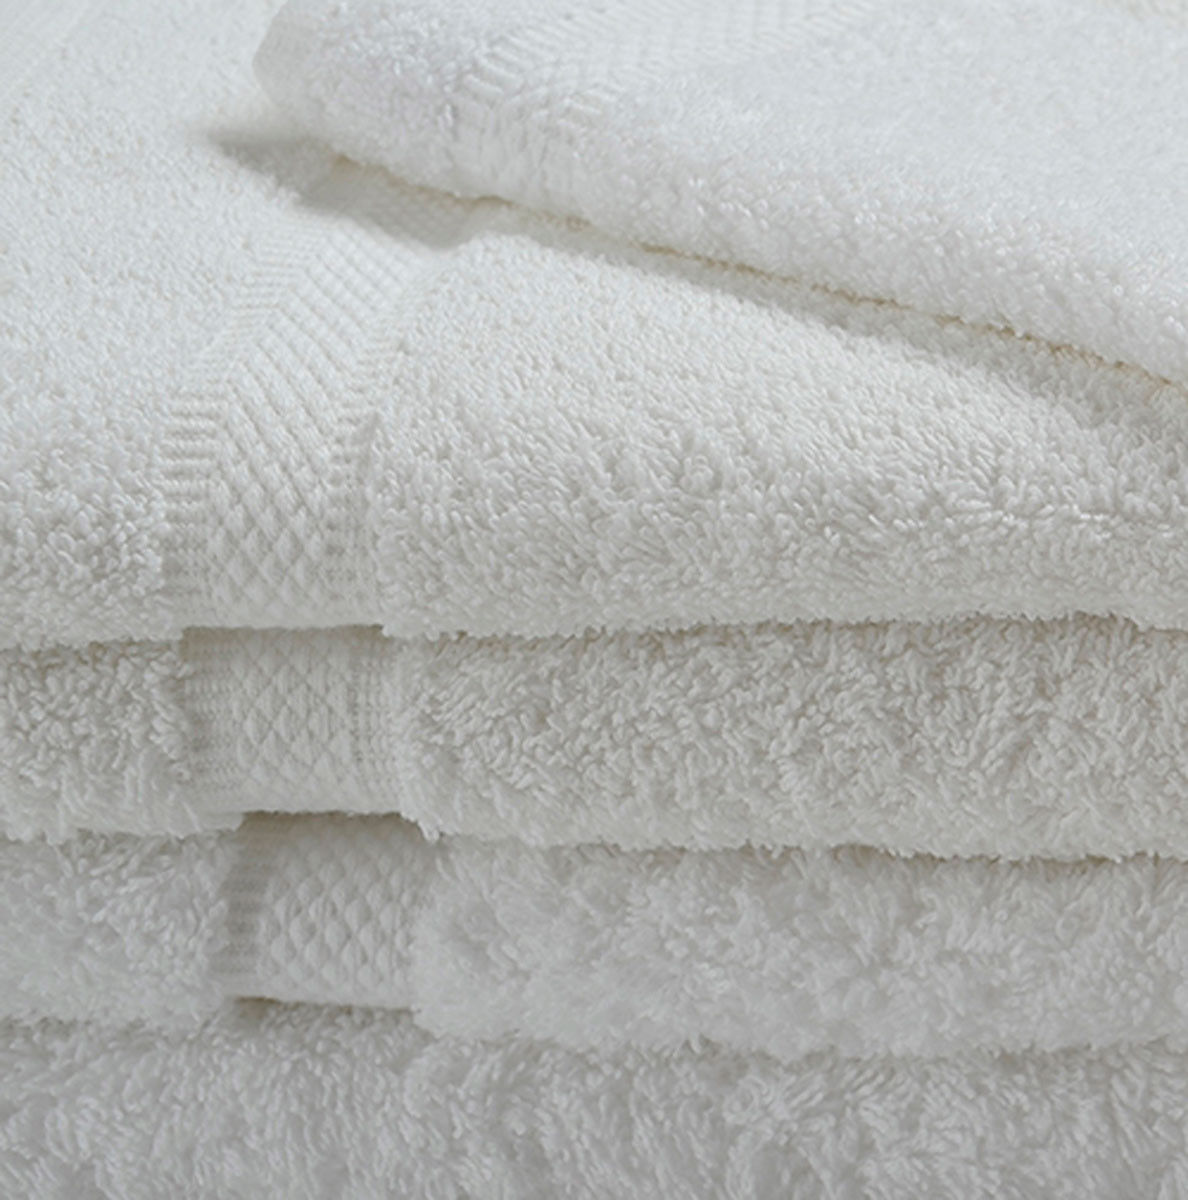 What's the origin and transit duration for shipping Oxford Imperiale towels?